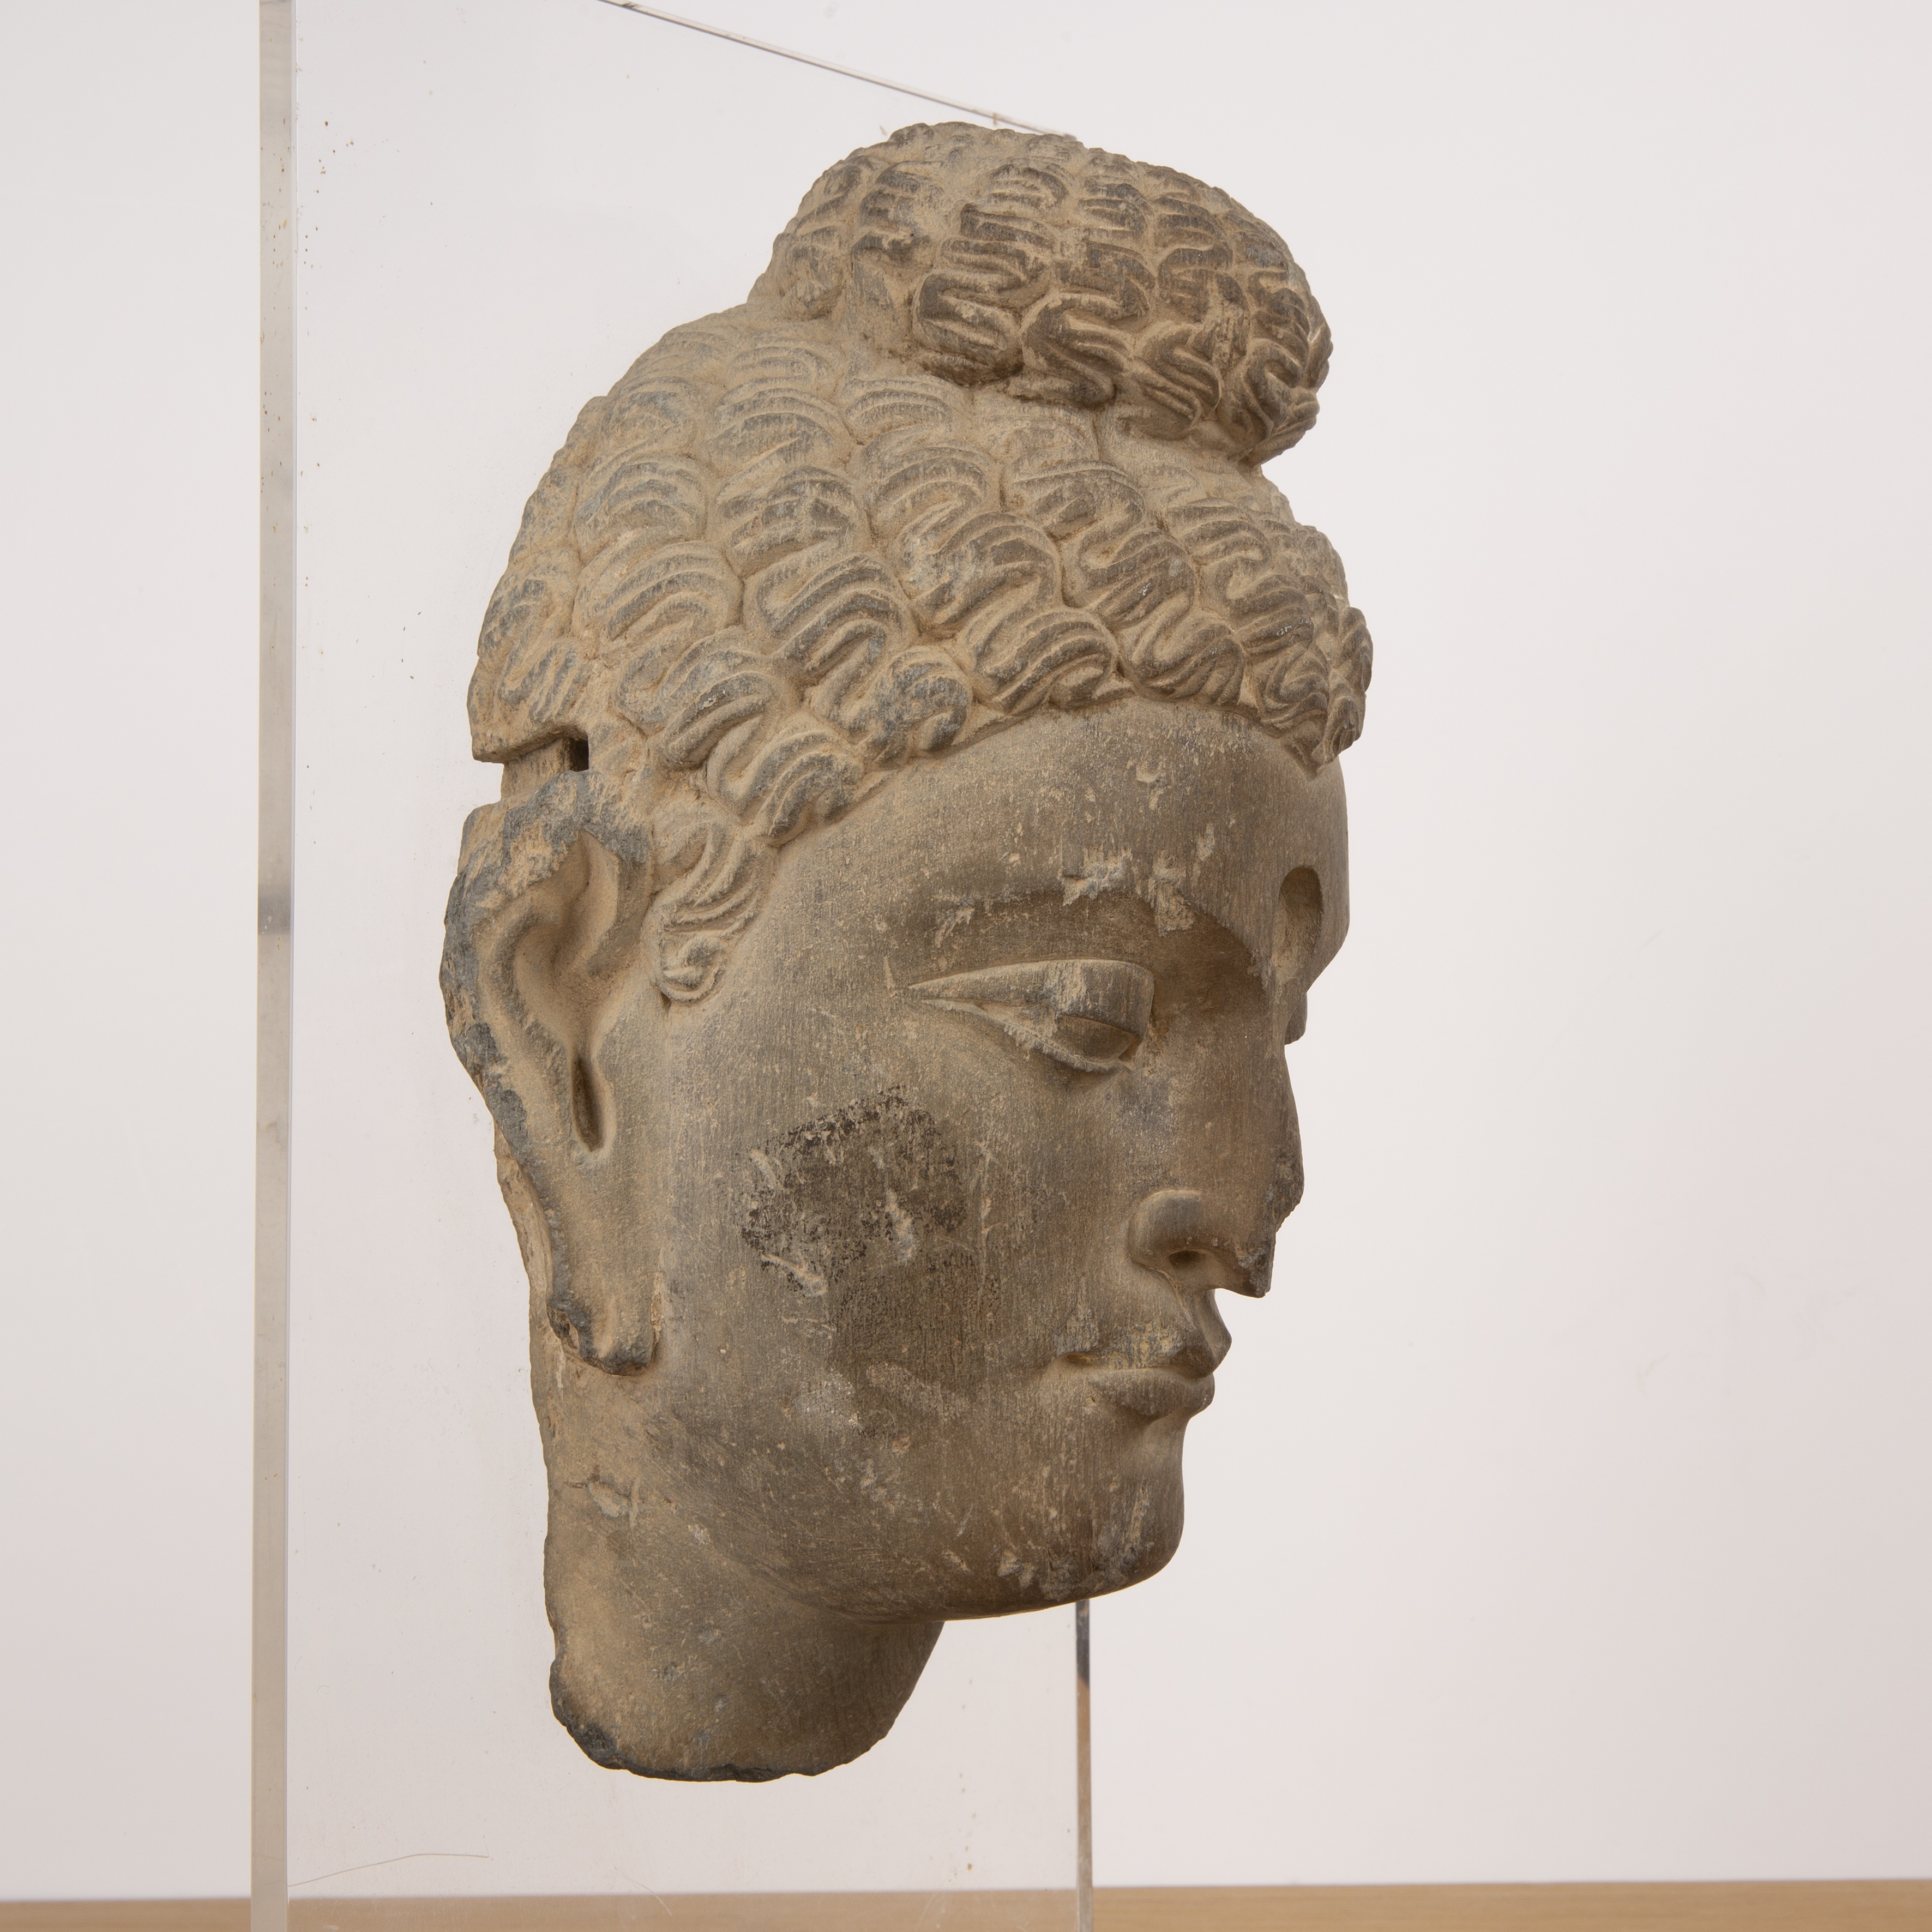 Fragmentary grey carved schist head of Buddha Indian, ancient region of Gandhara, 3rd-4th Century - Image 2 of 9